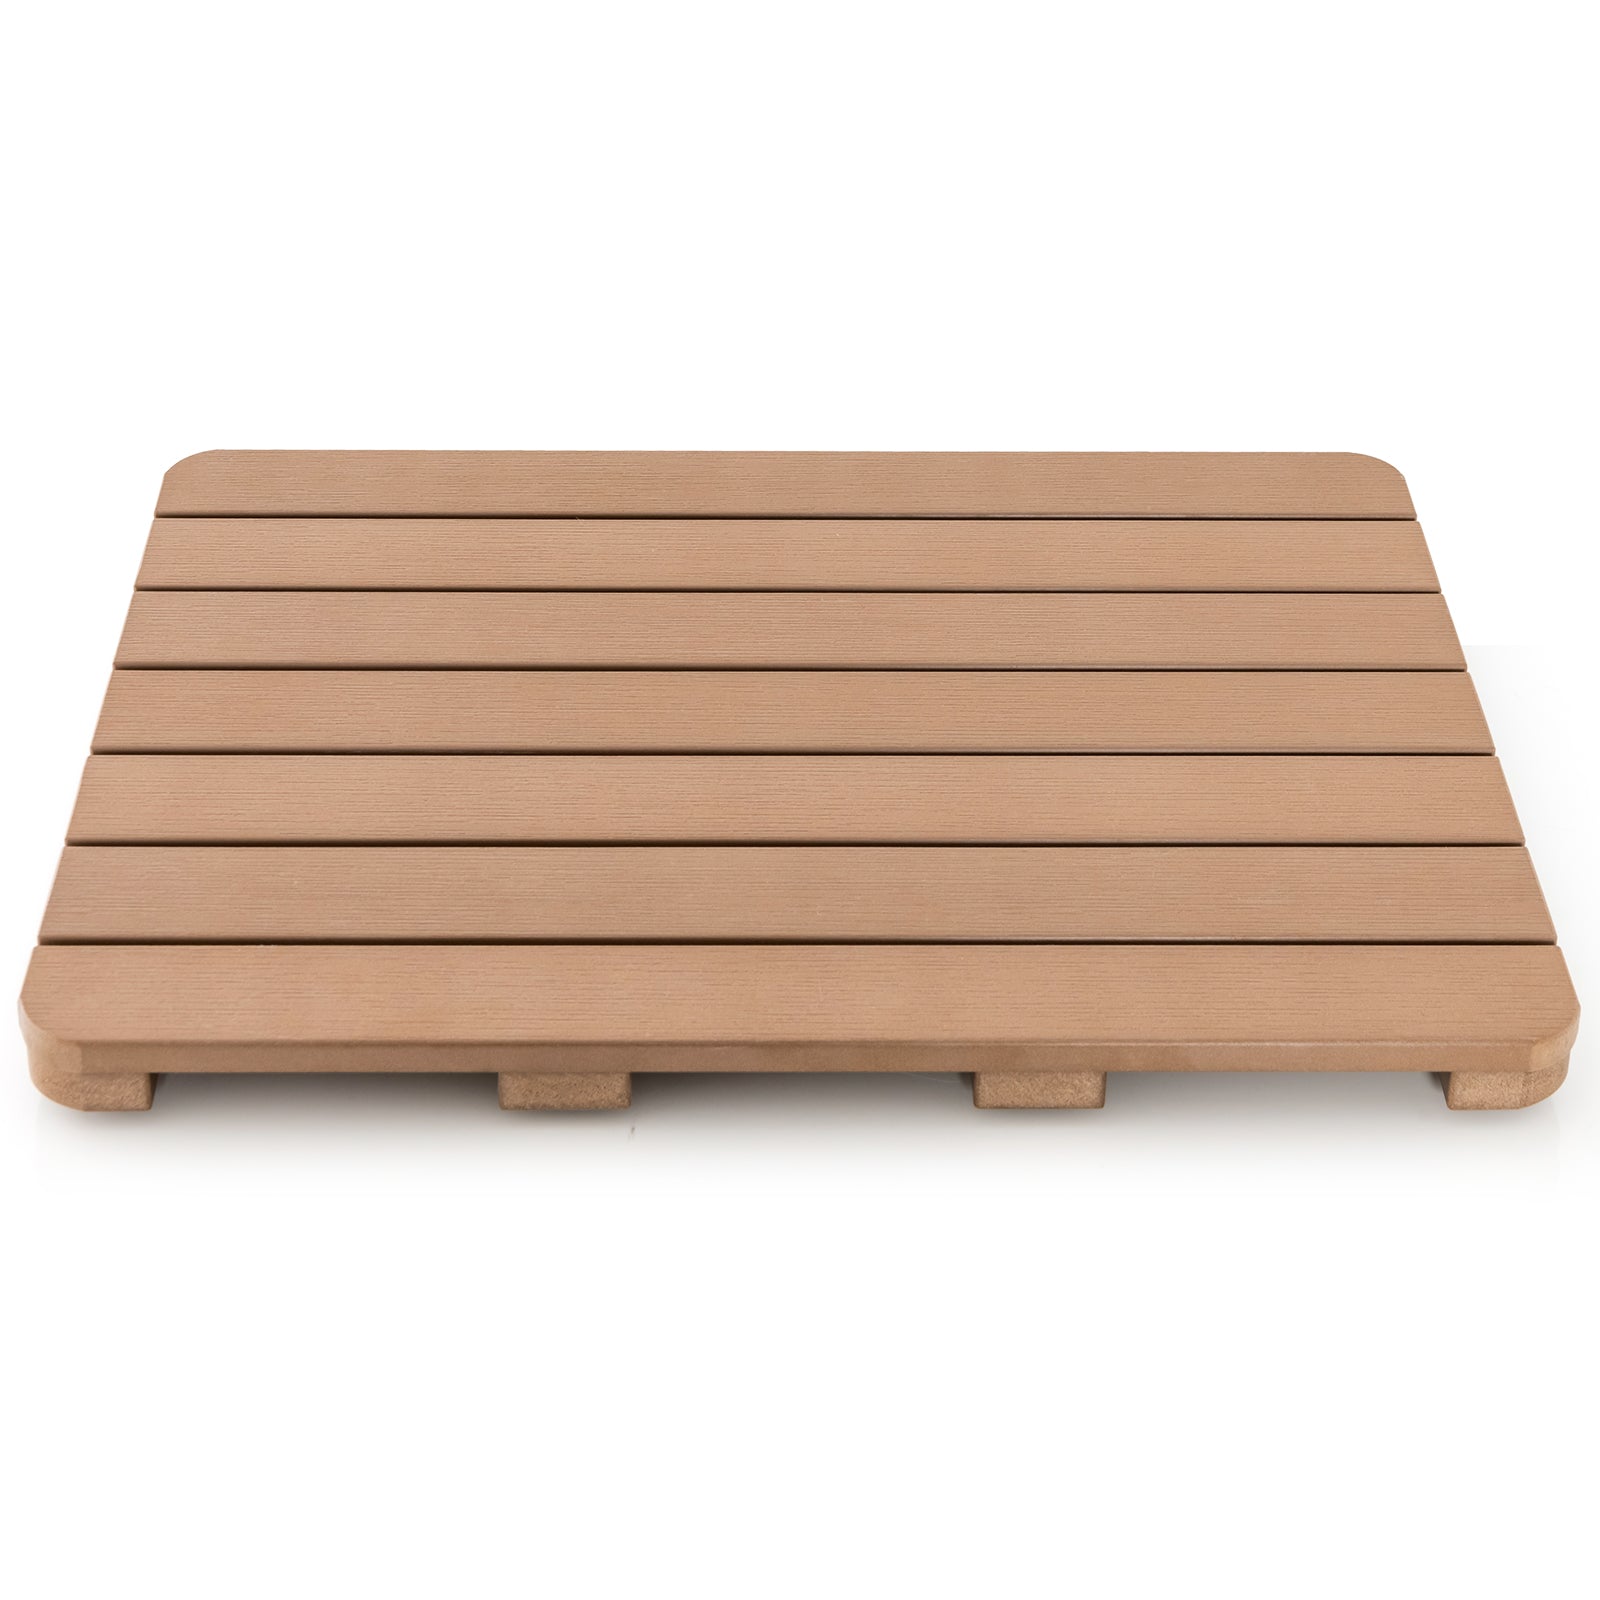 55 x 34 cm Bath Mat for Shower with Non Slip Foot Pads-Brown